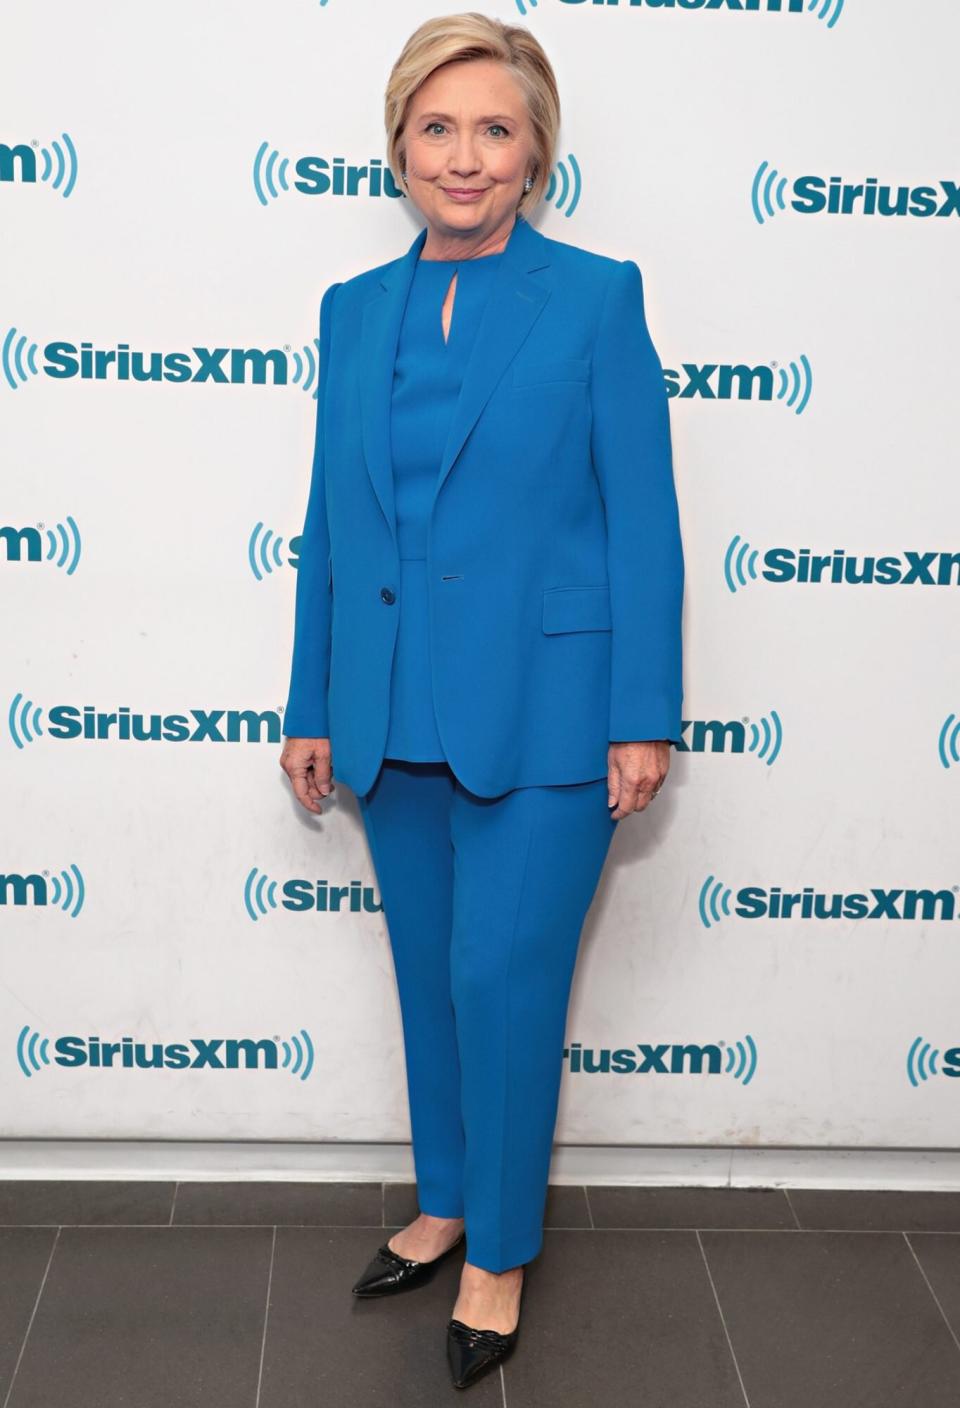 Former Secretary of State Hillary Clinton joins SiriusXM for a town hall event hosted by Zerlina Maxwell